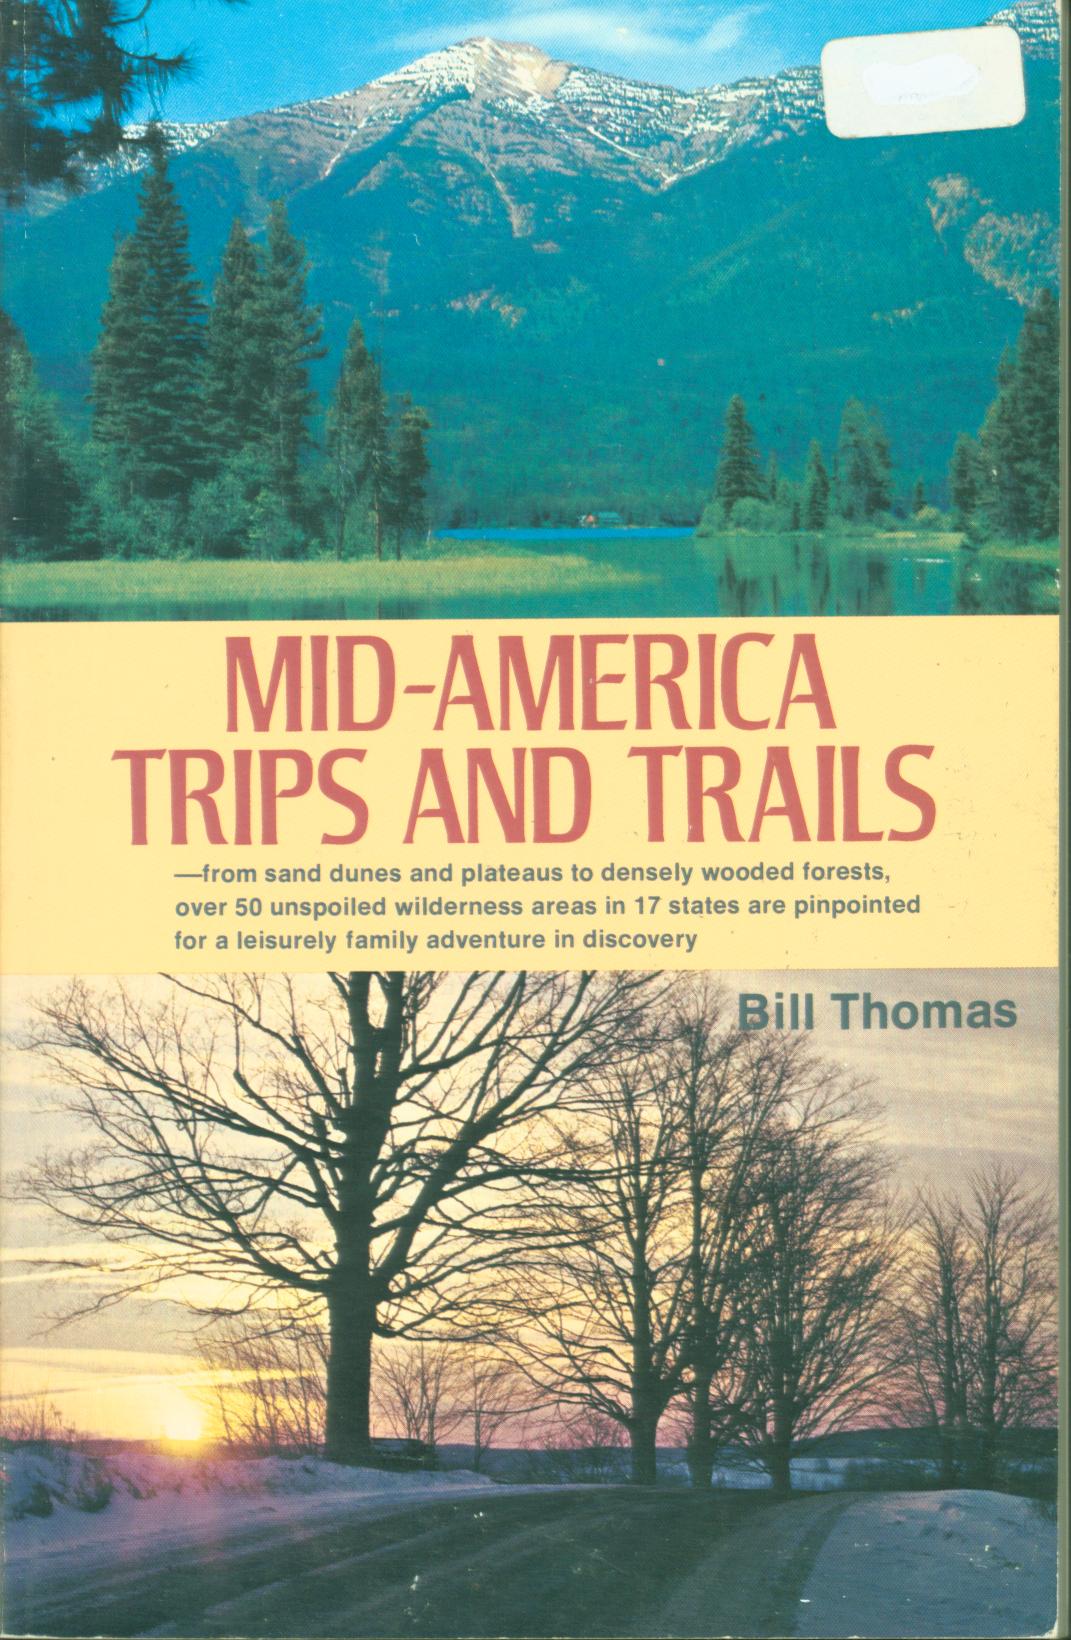 MID-AMERICA TRIPS AND TRAILS. 